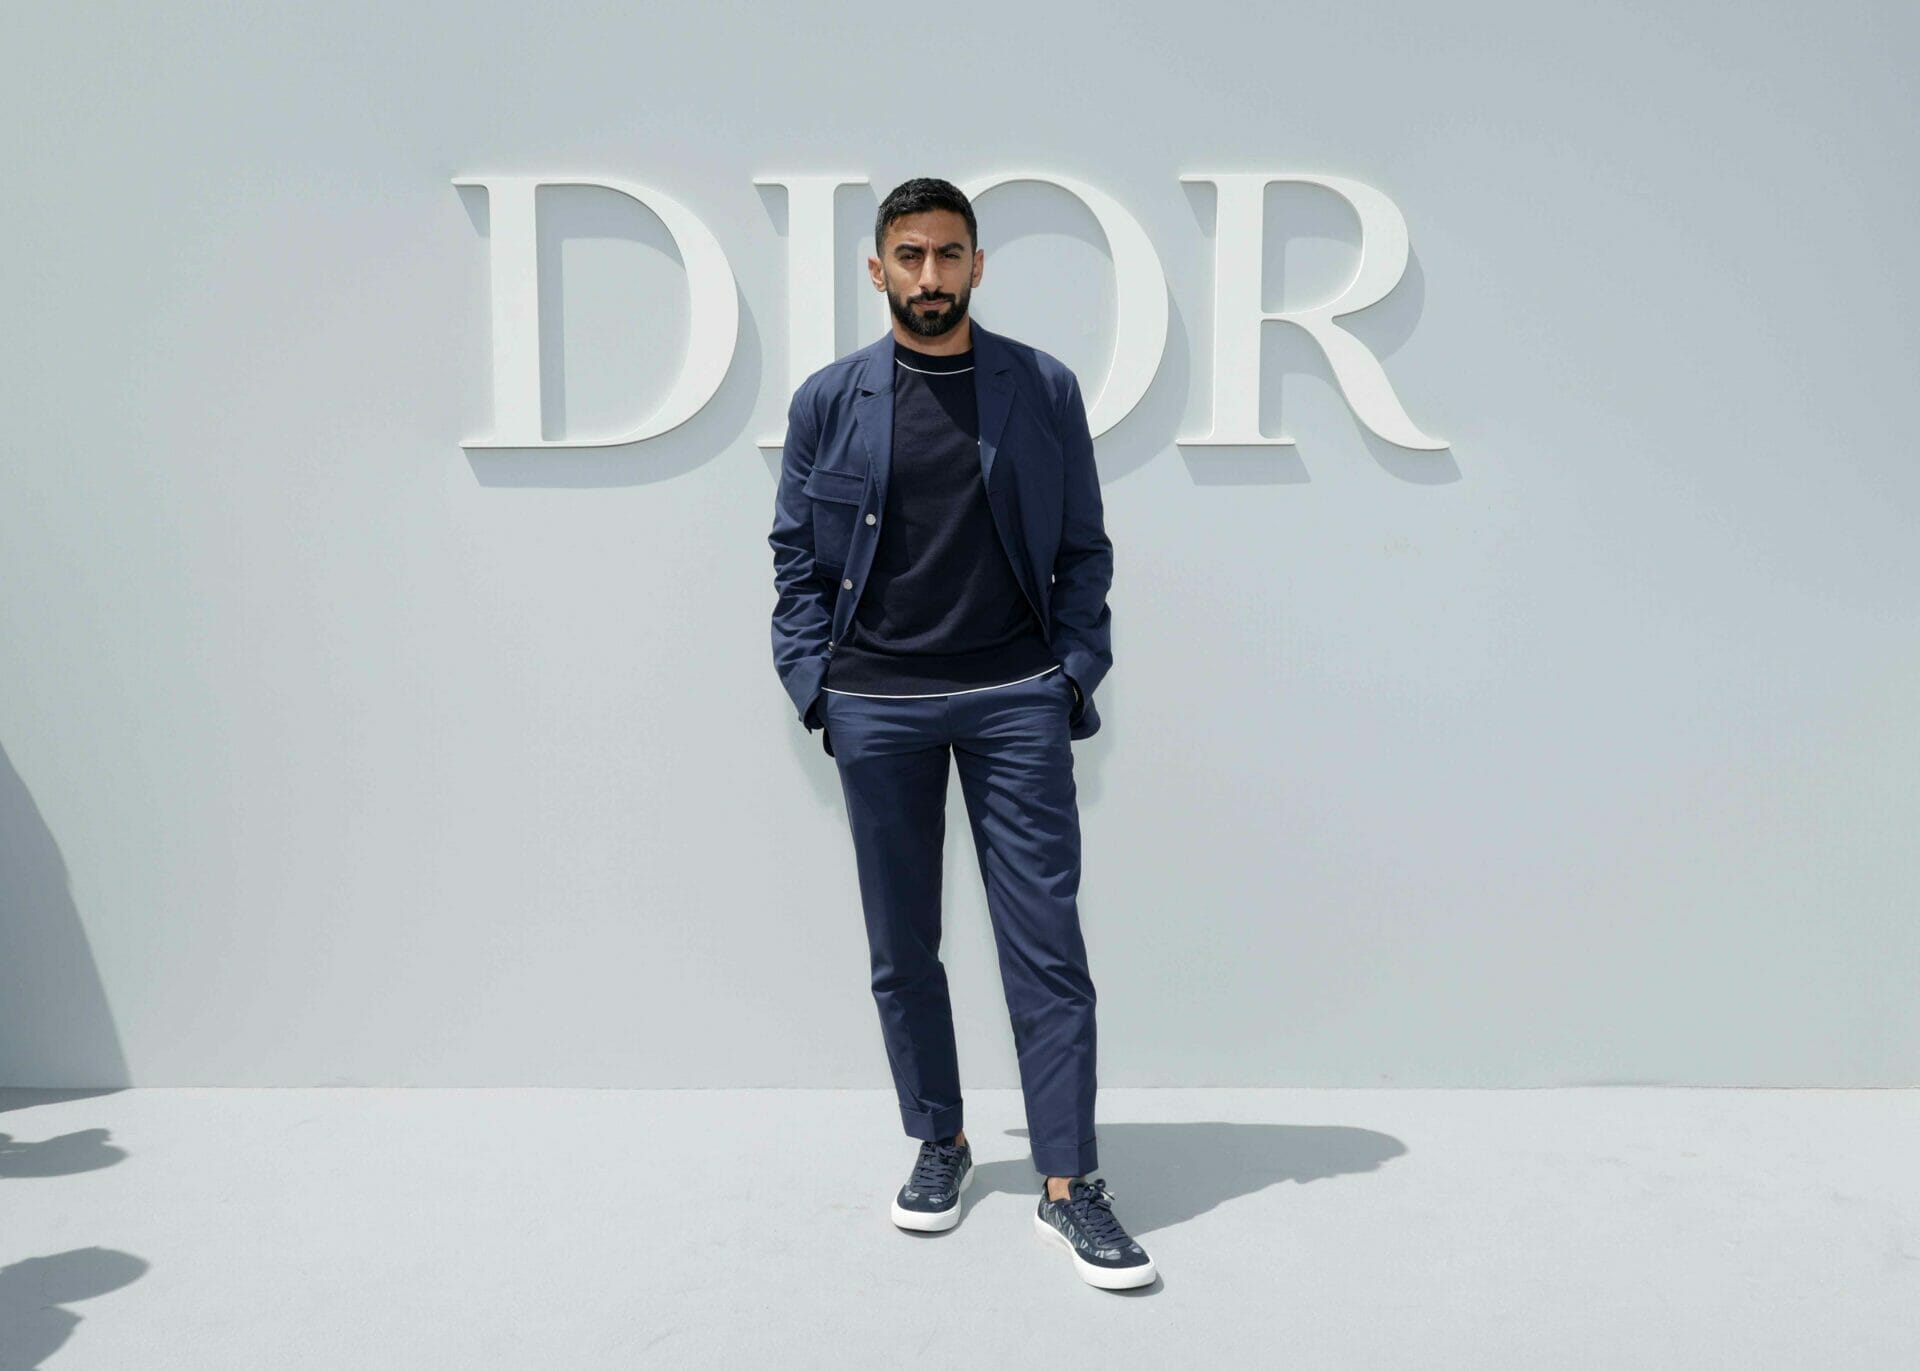 Everything you need to know about the Dior Men's Spring/Summer 2023 Show.